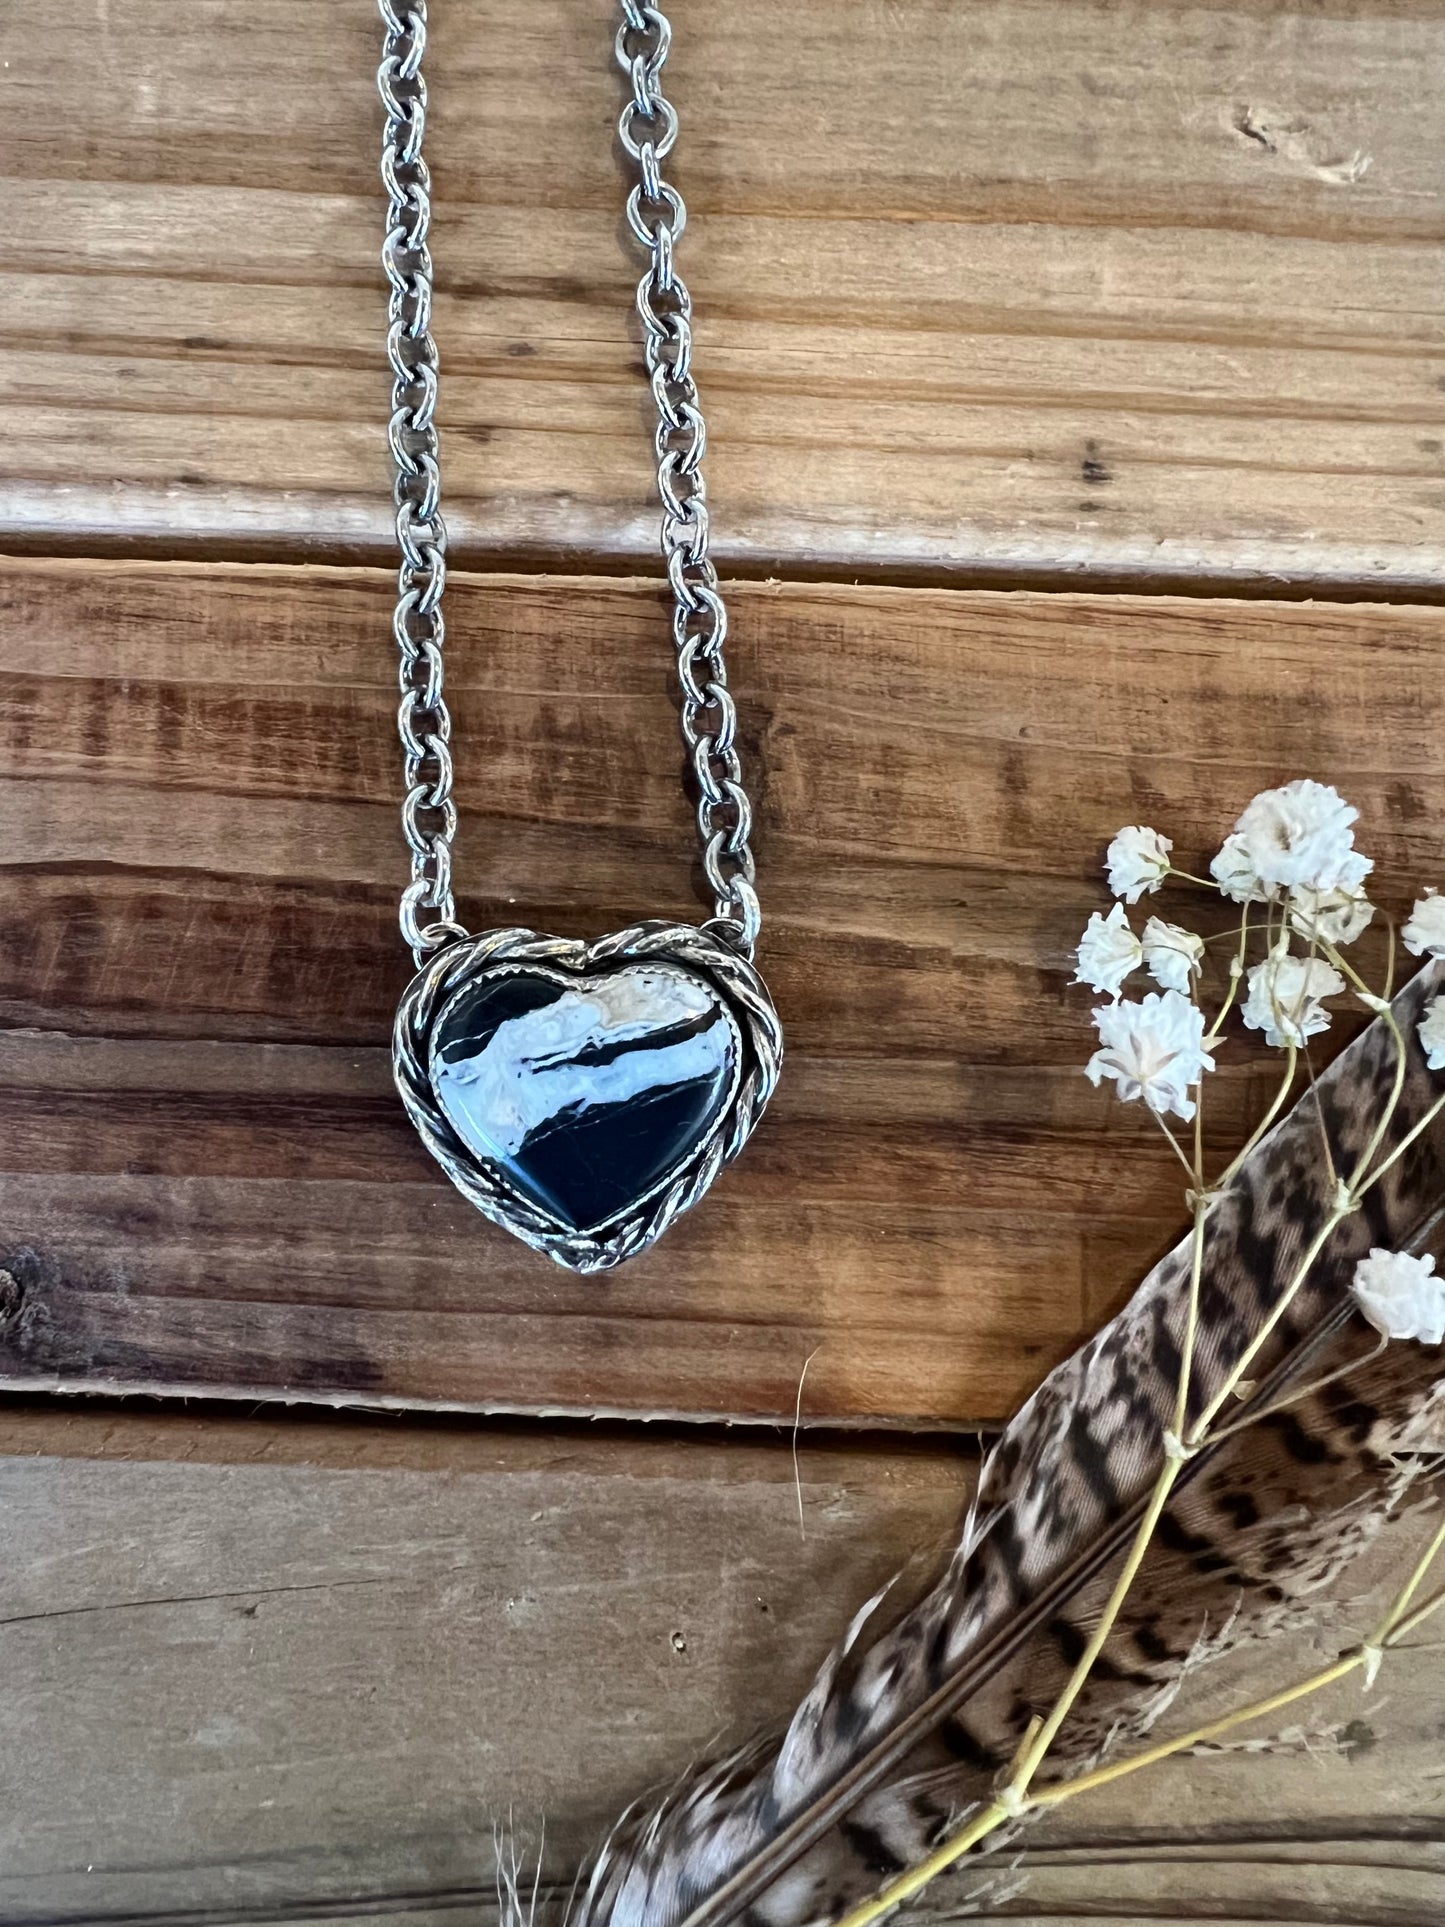 The Harley Heart Necklace